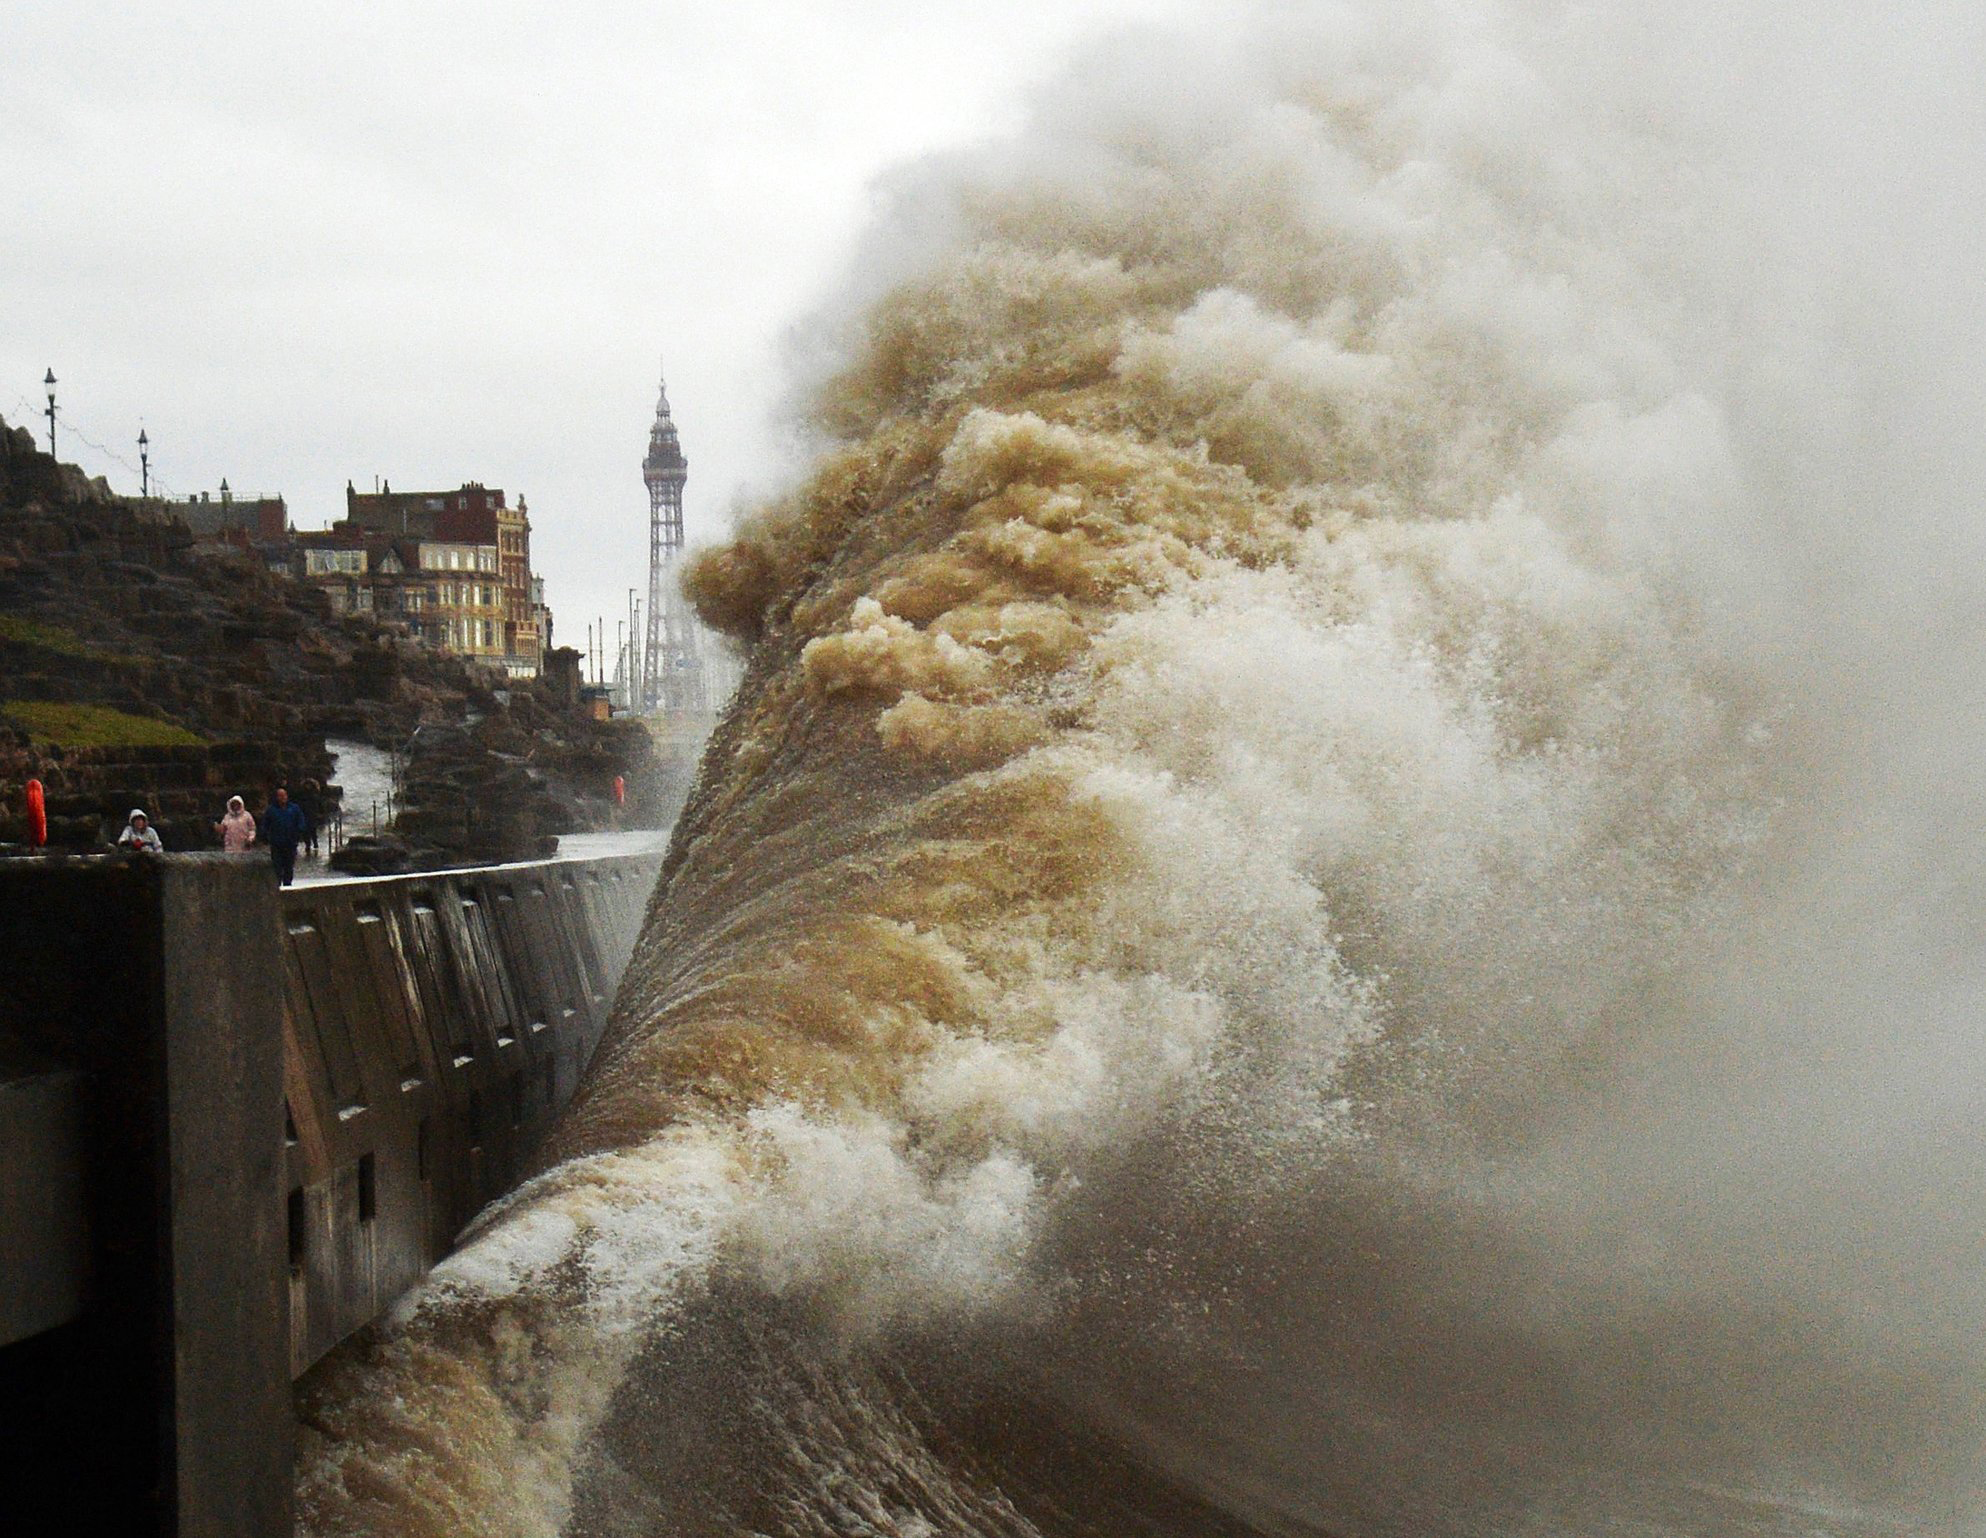 A wave created by Storm Dennis crashes into a tidal barrier in Blackpool